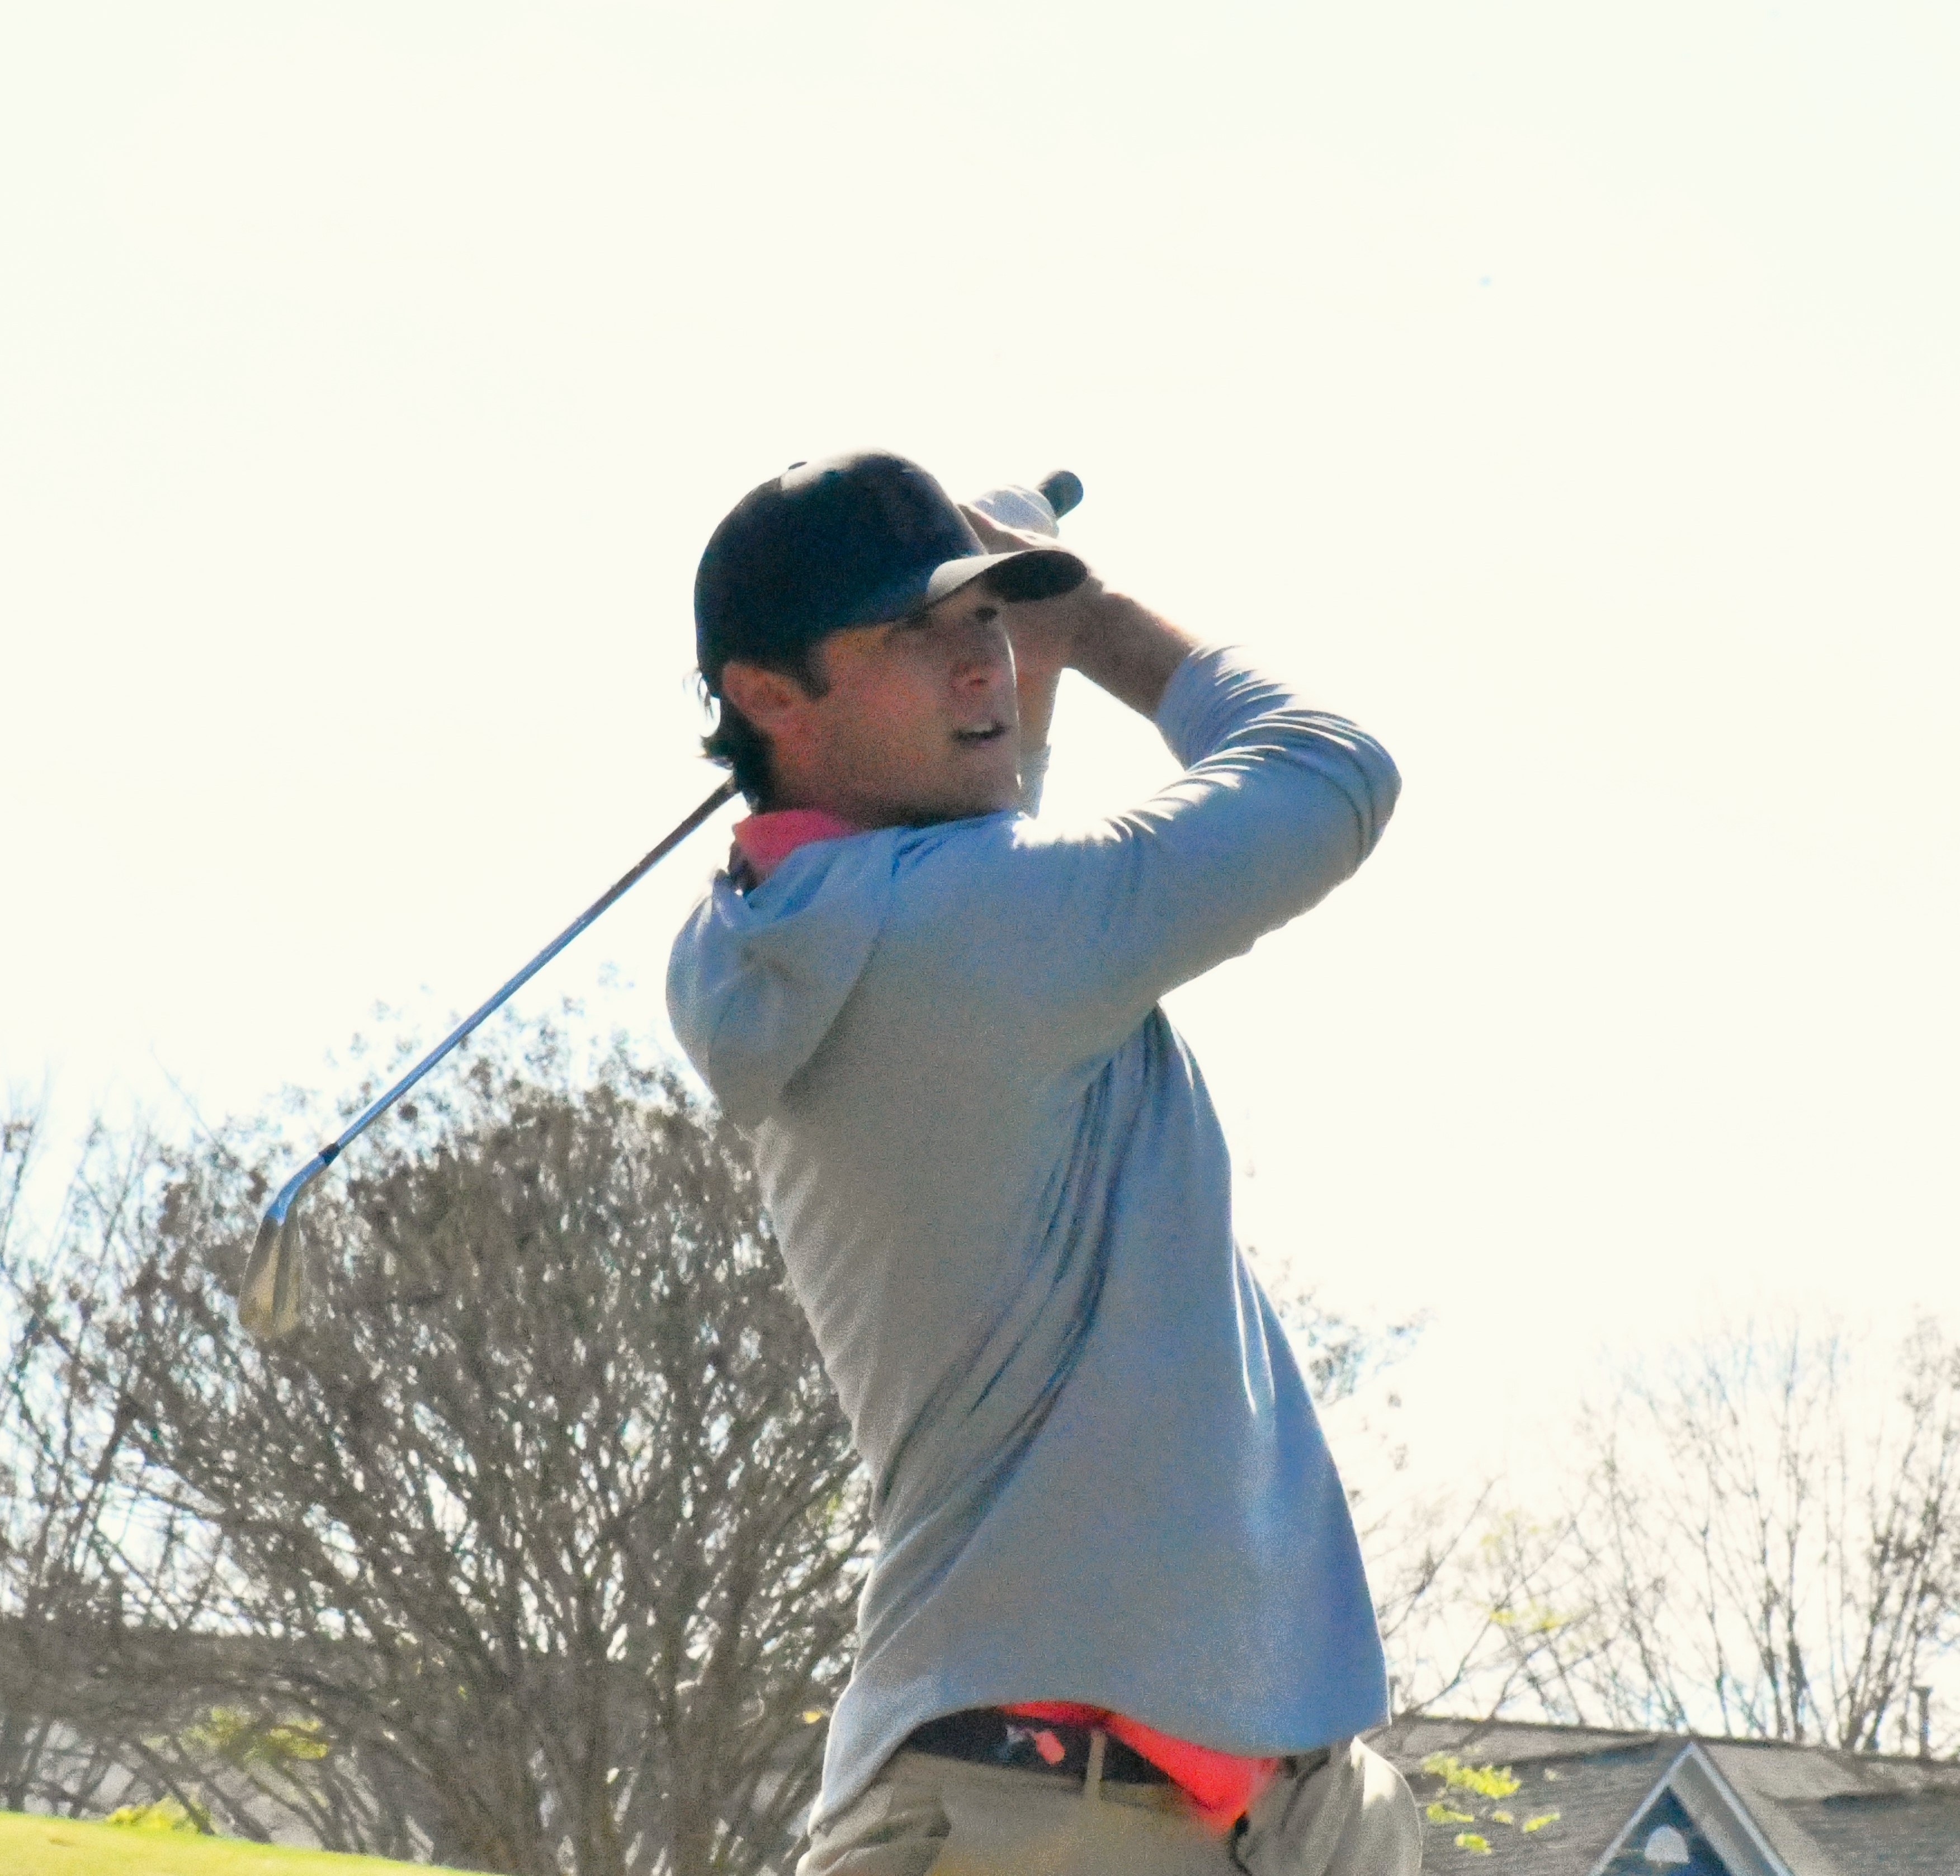 Nation Ford wins four-way golf match, Jackets finish third (March 18 Roundup)